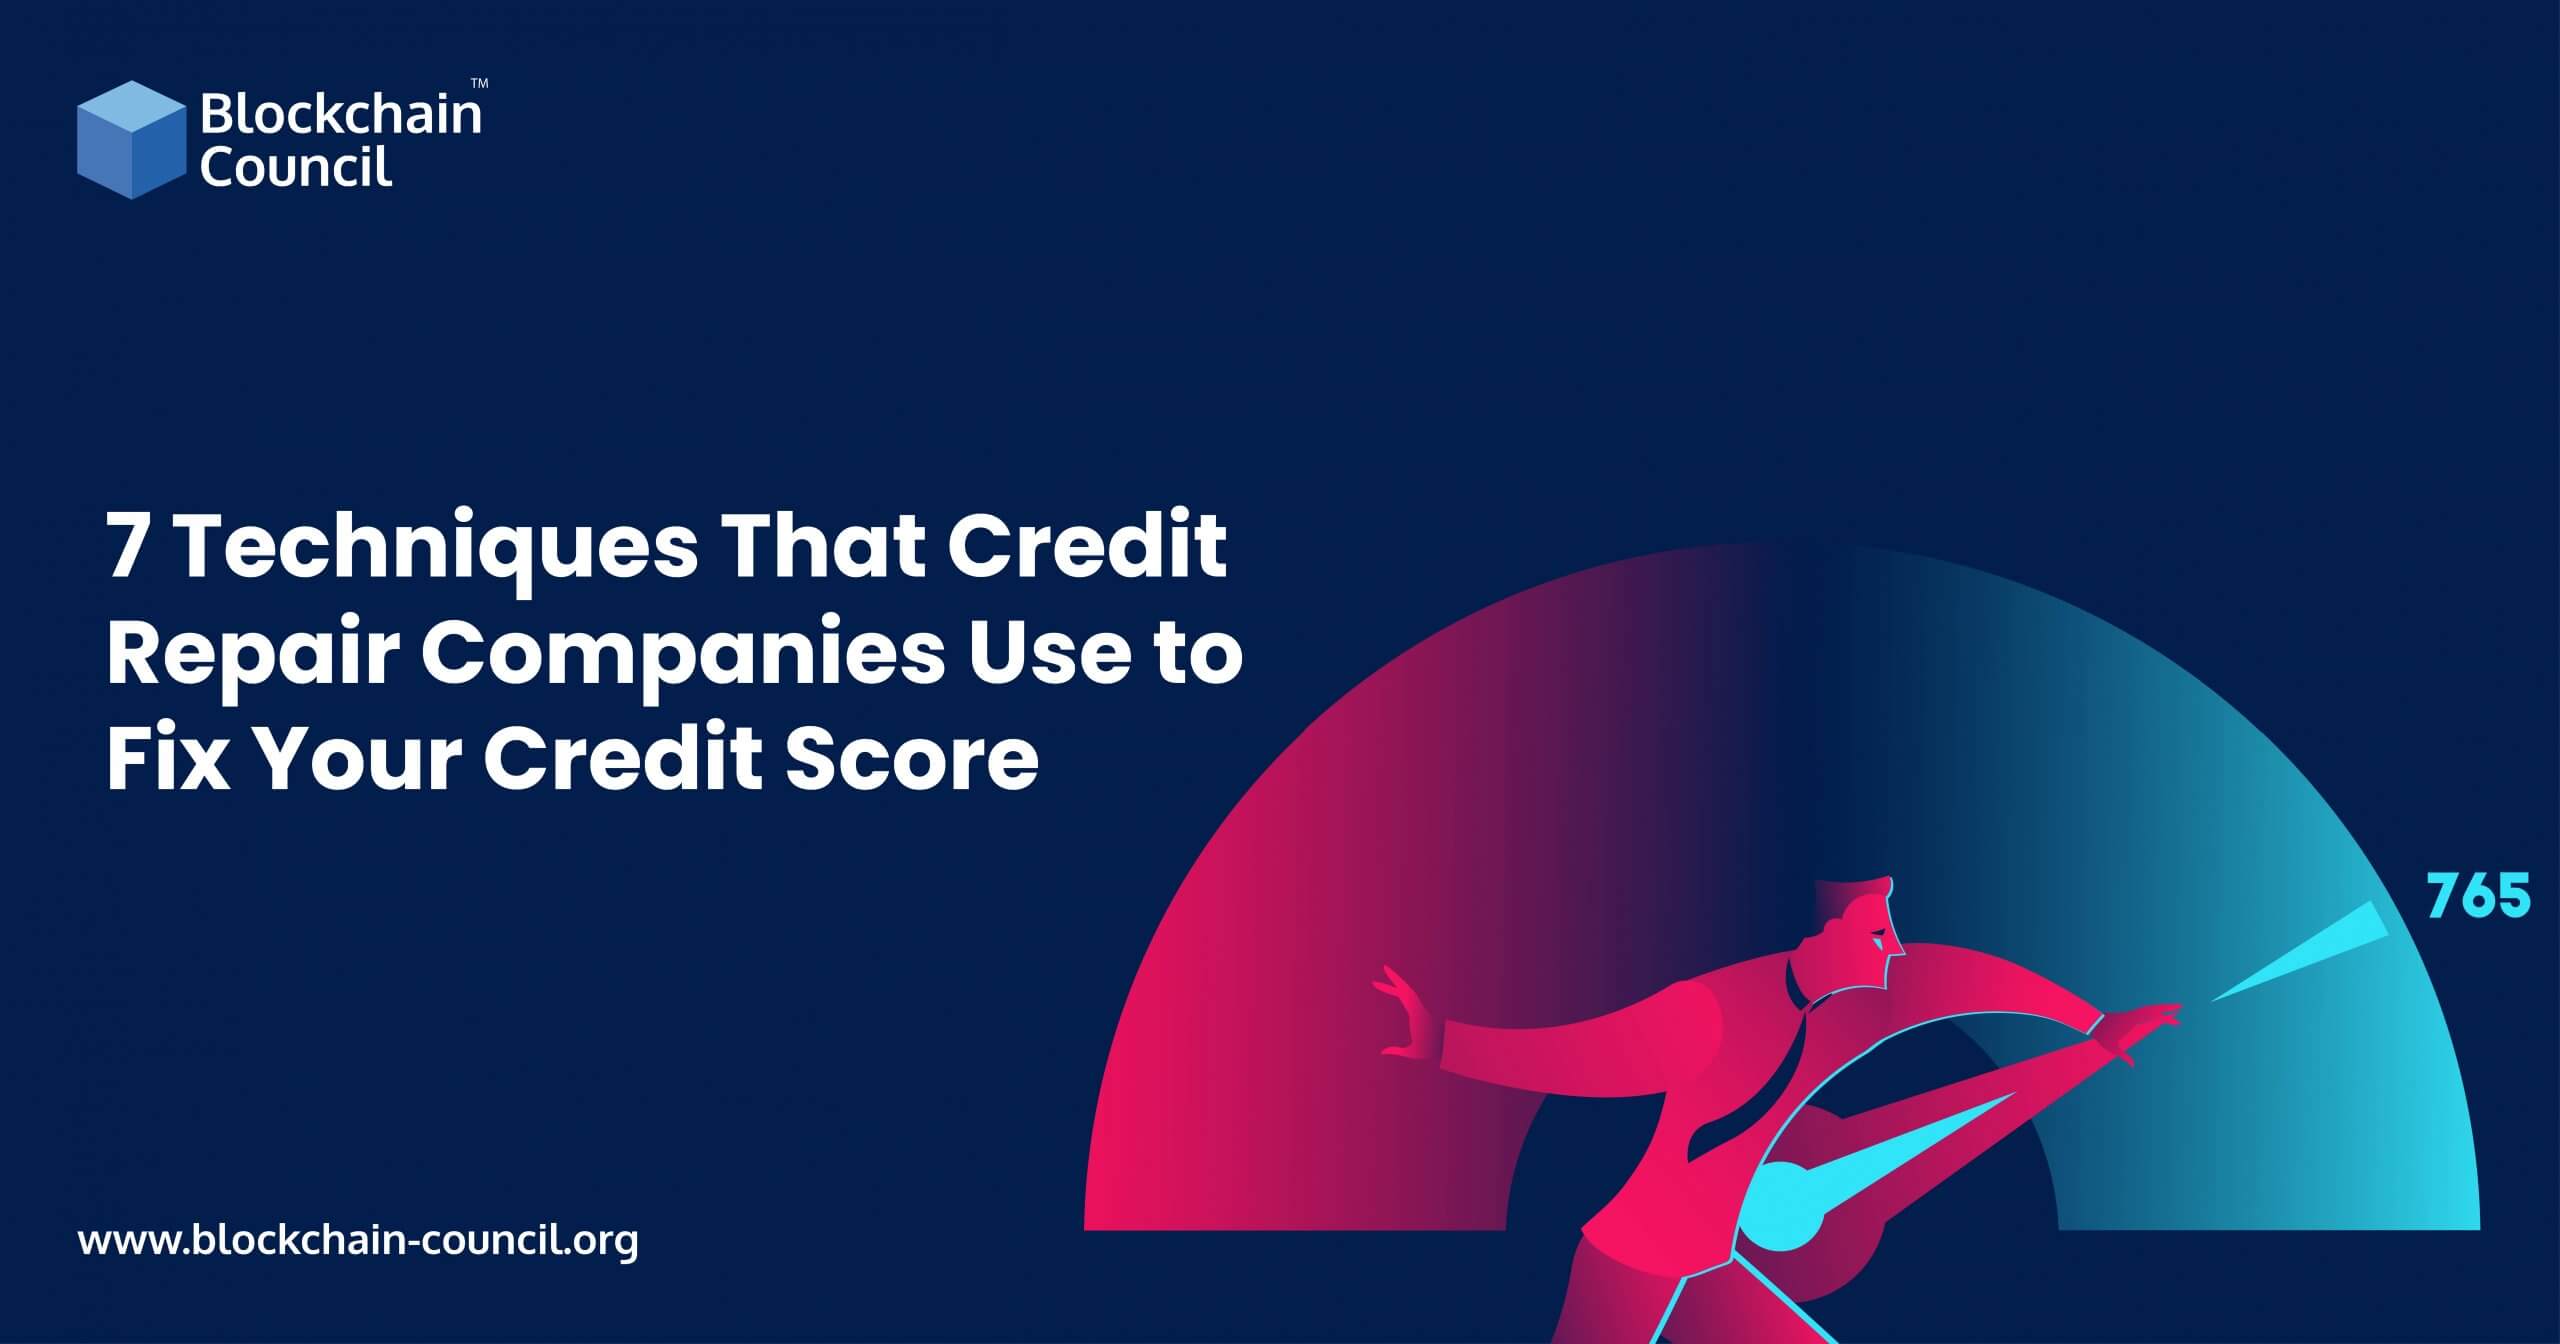 7 Techniques That Credit Repair Companies Use to Fix Your Credit Score